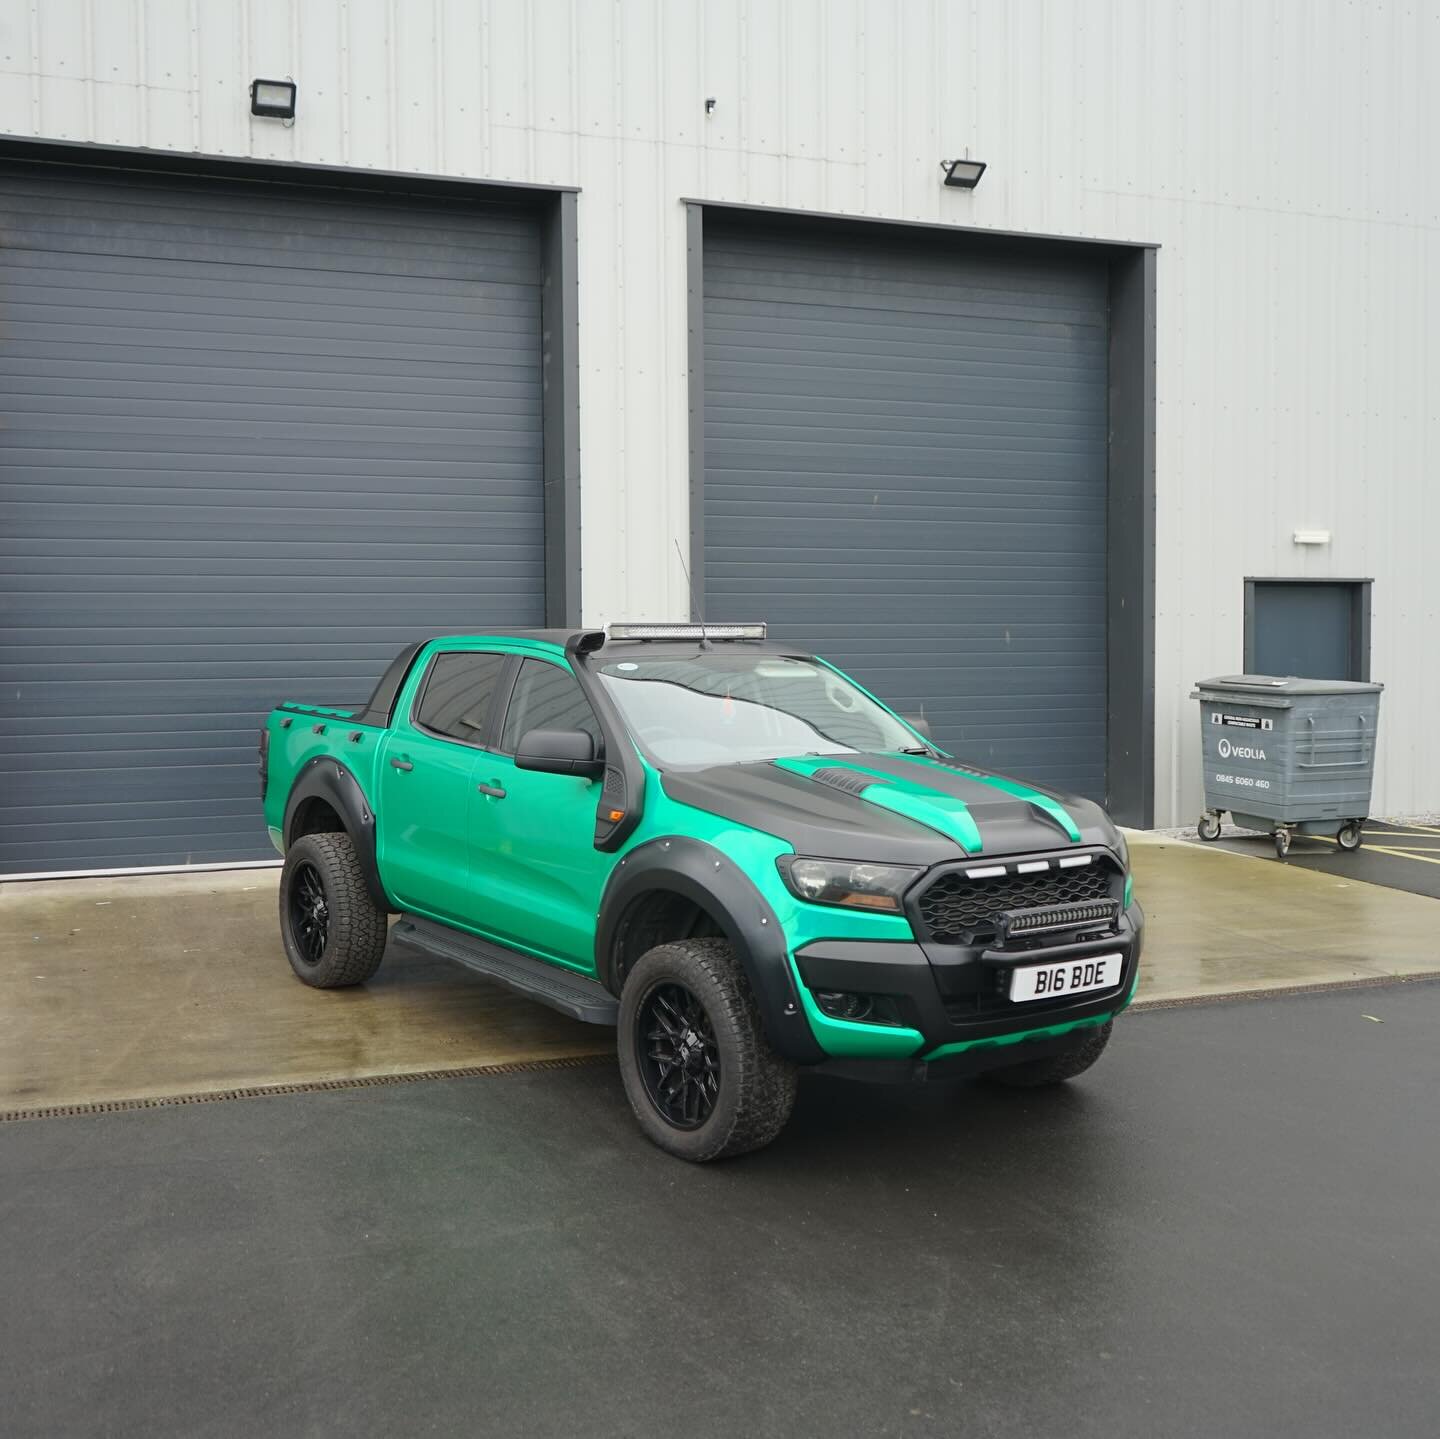 This Ford Ranger Has Had Several Transformations With Us, This Time We Stripped The Old Matt Black Wrap And Gave It A New Look With 3M&rsquo;s new High Gloss Green Envy. @3mfilmsuk 

Need A Vehicle Branding? 

Get In Touch And Let Us Transform Your V